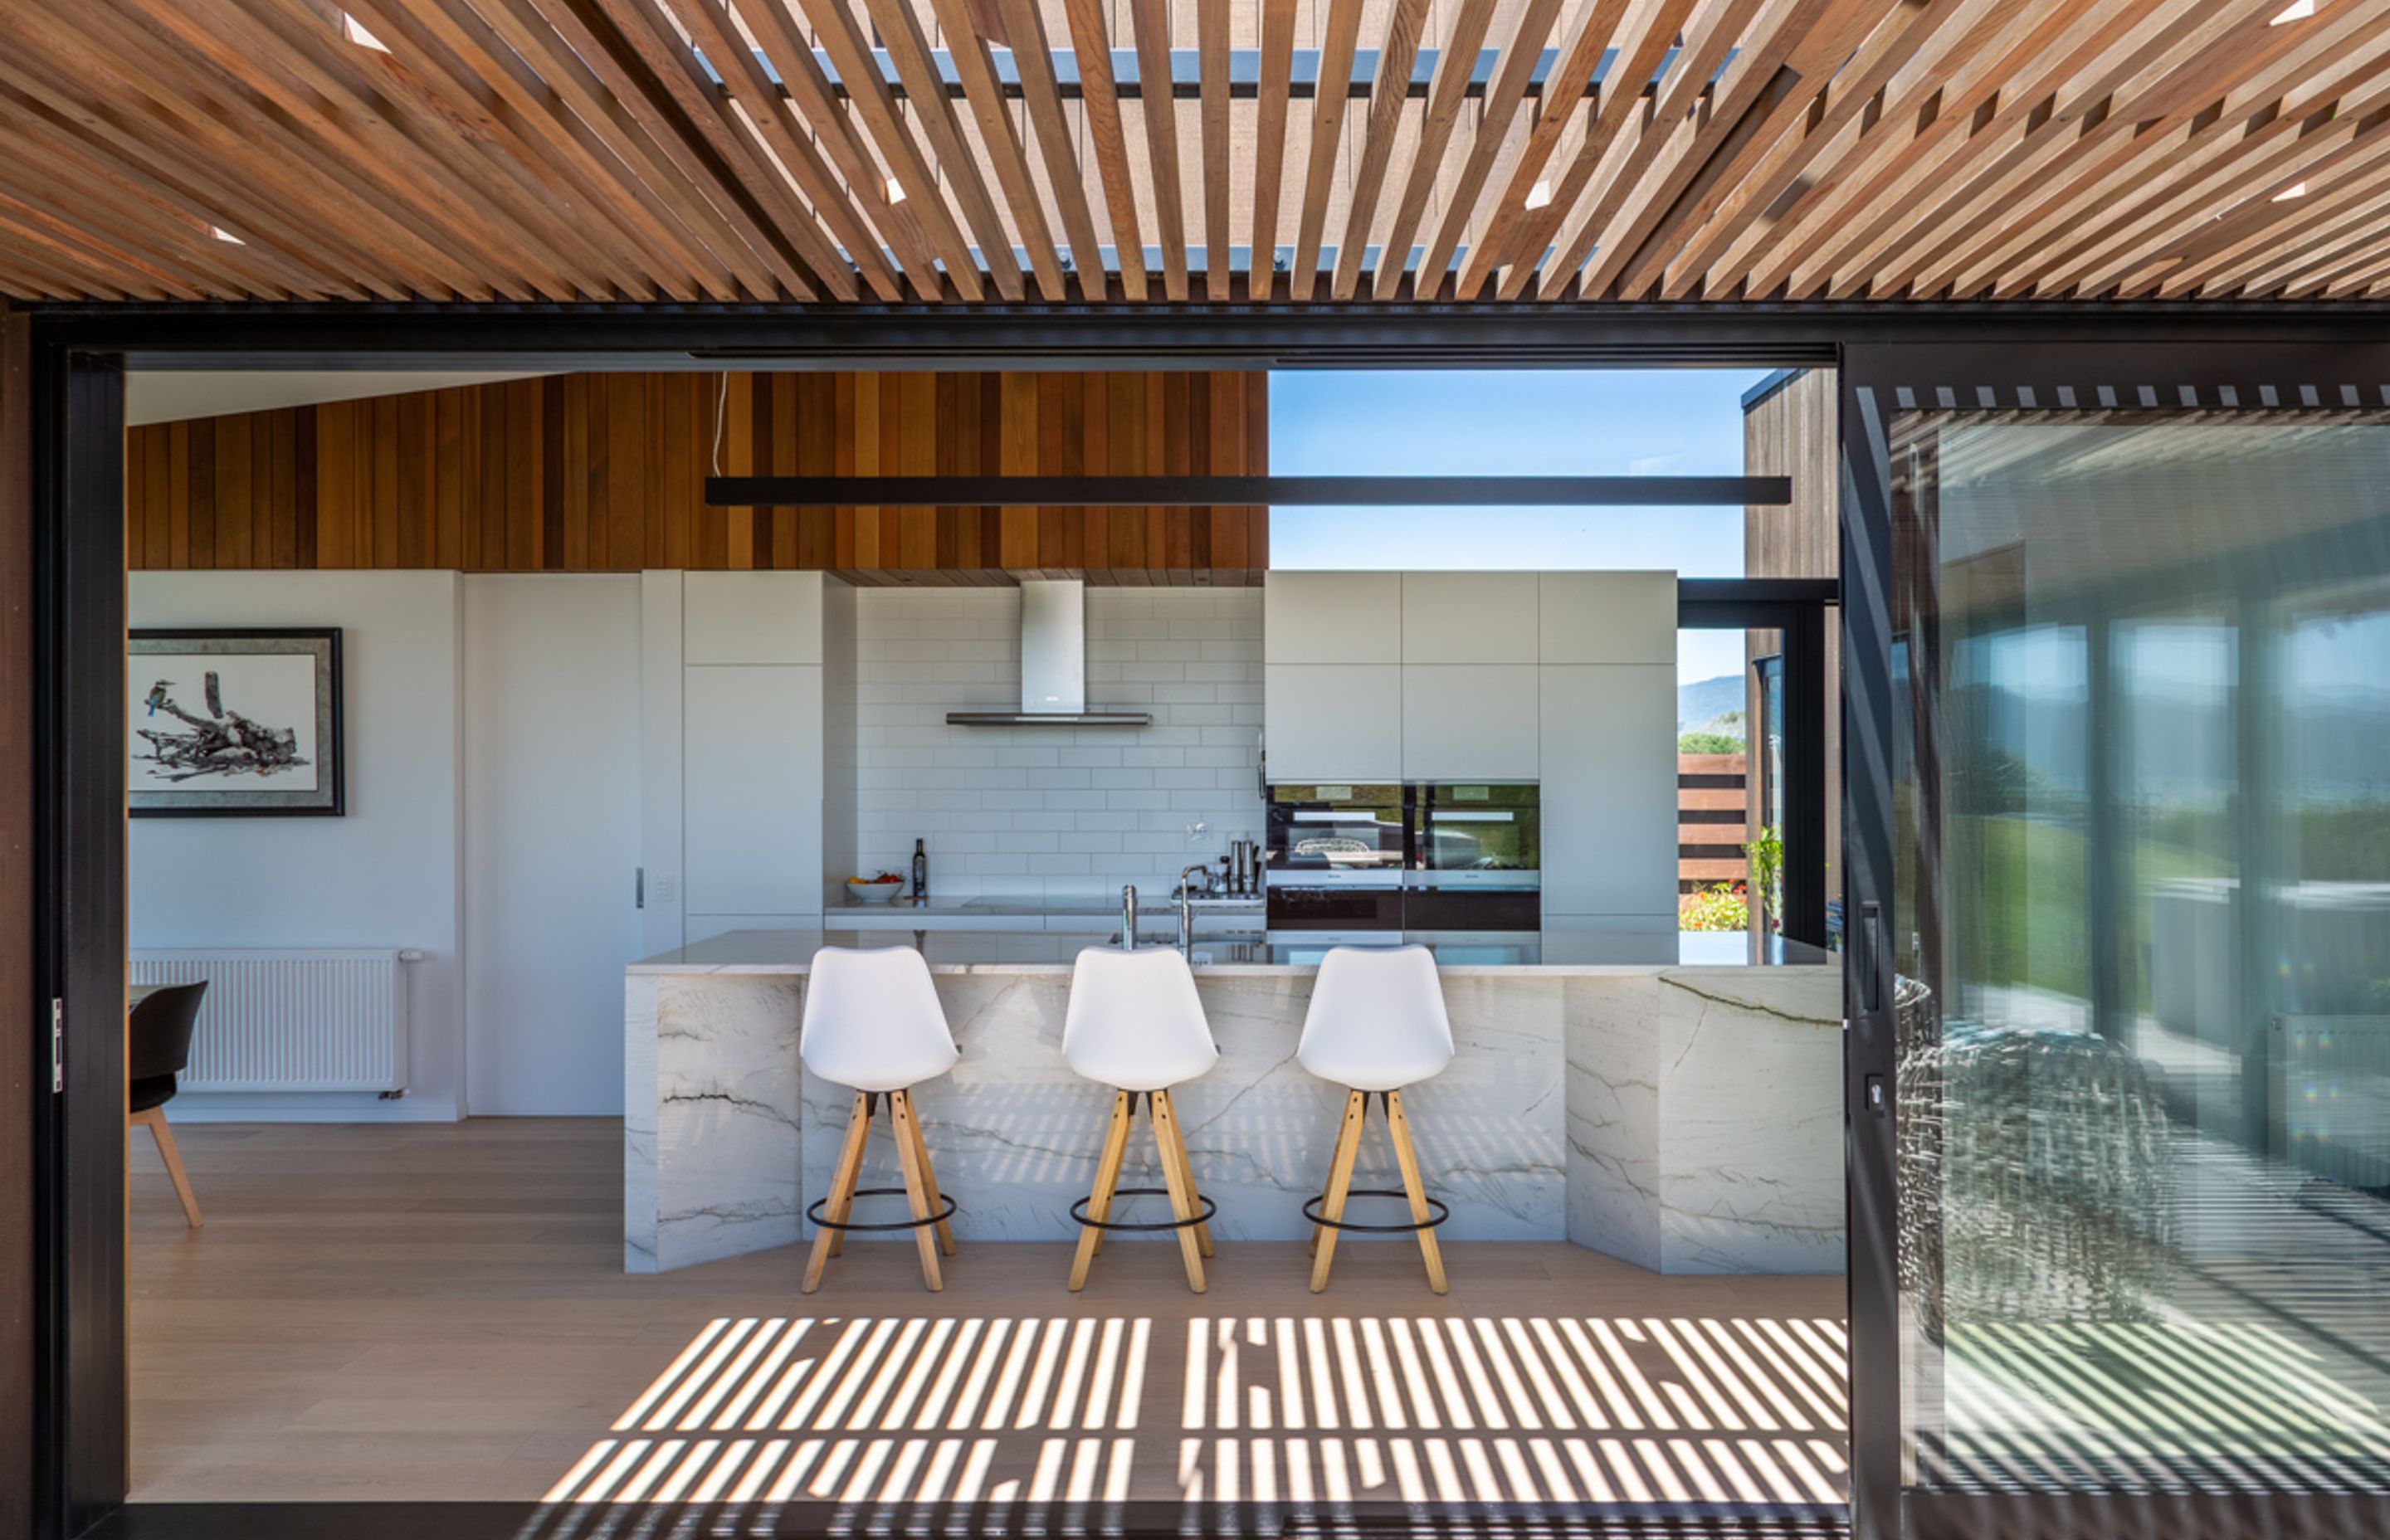 The kitchen, which is placed in the intersection between the four 'pods' of the home.